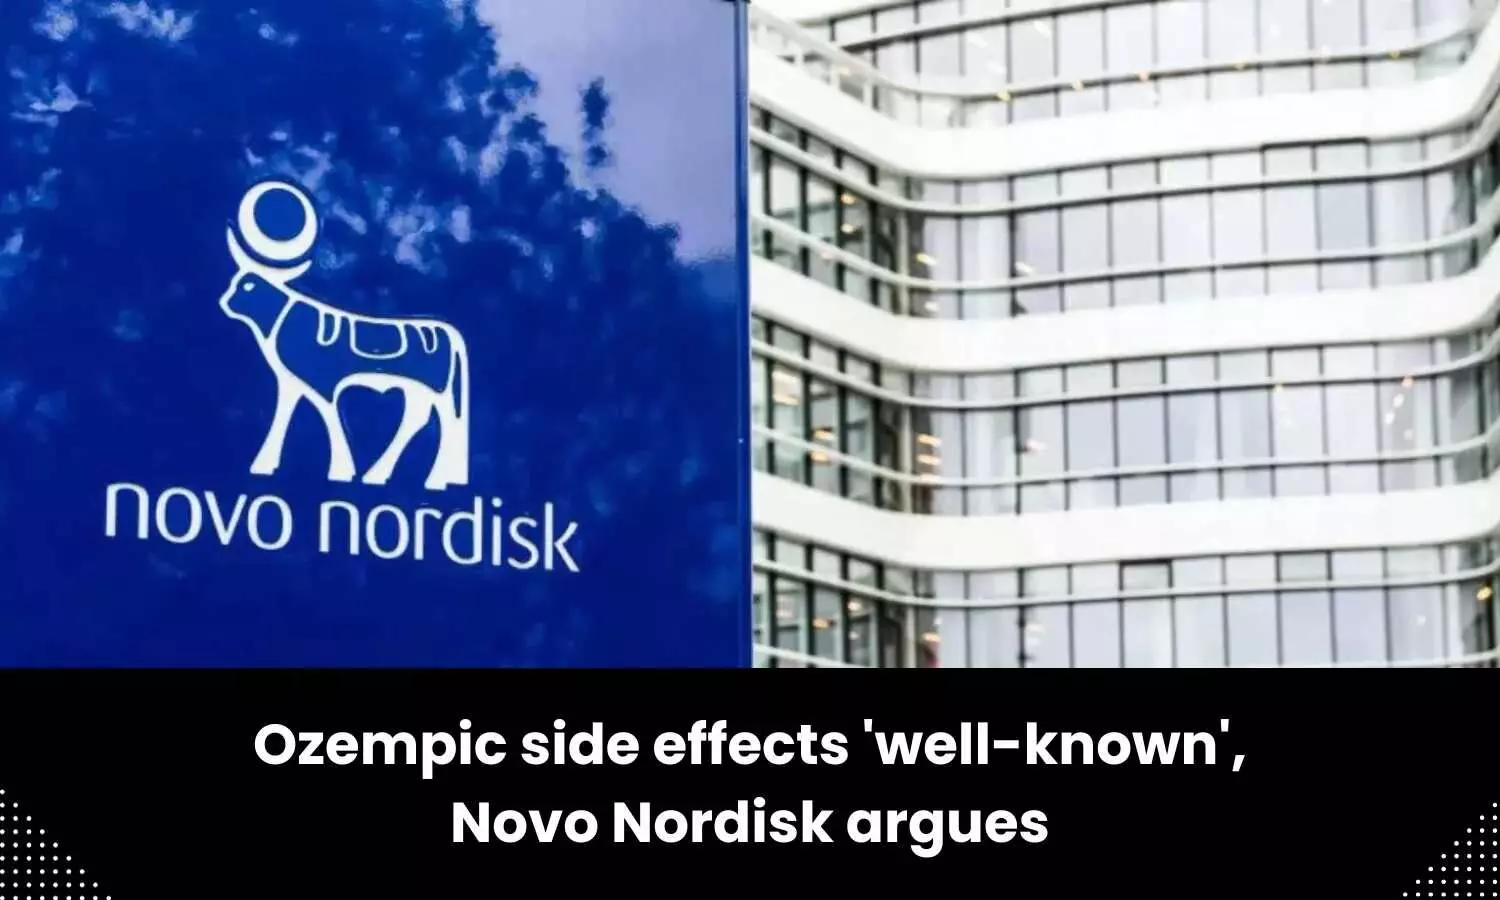 Ozempic side effects well known: Novo Nordisk